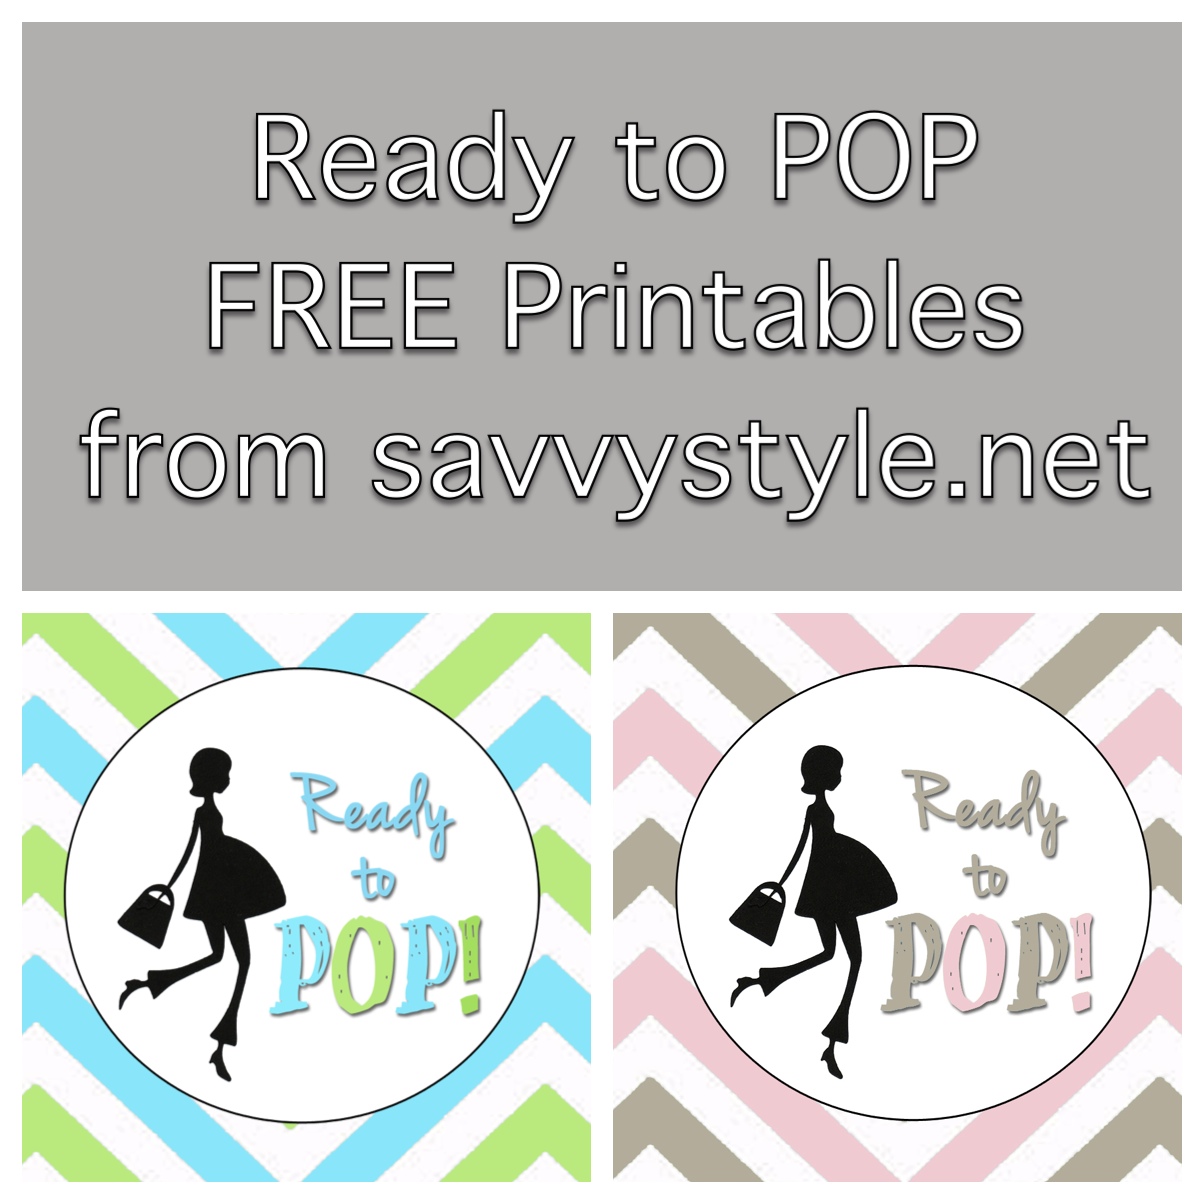 Ready to Pop Free Printables Sweetwood Creative Co.  Atlanta Within Ready To Pop Labels Template